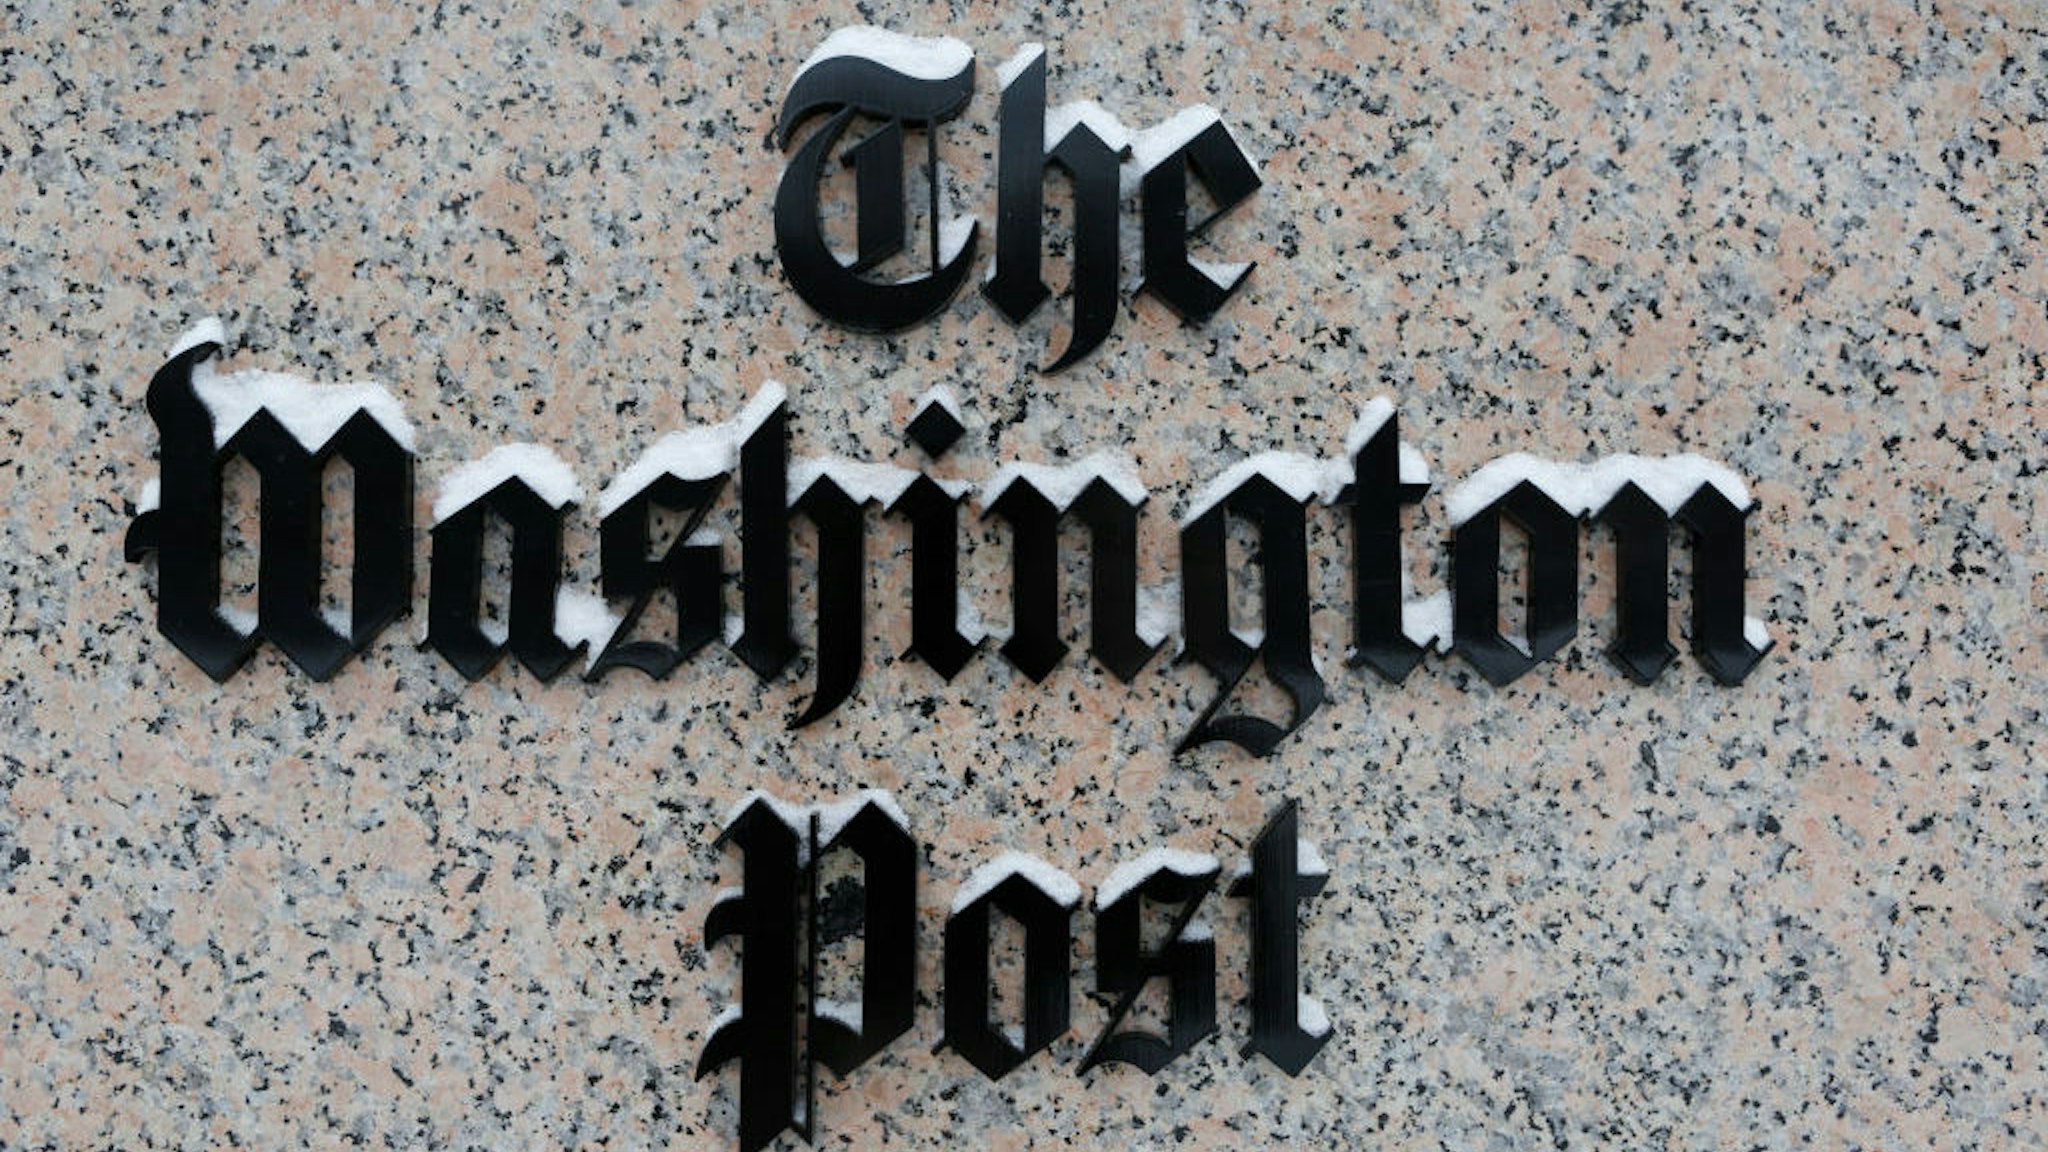 WASHINGTON, DC - JANUARY 23: Washington Post logo outside of the building covered with snow. (Photo by Oliver Contreras/For The Washington Post via Getty Images)